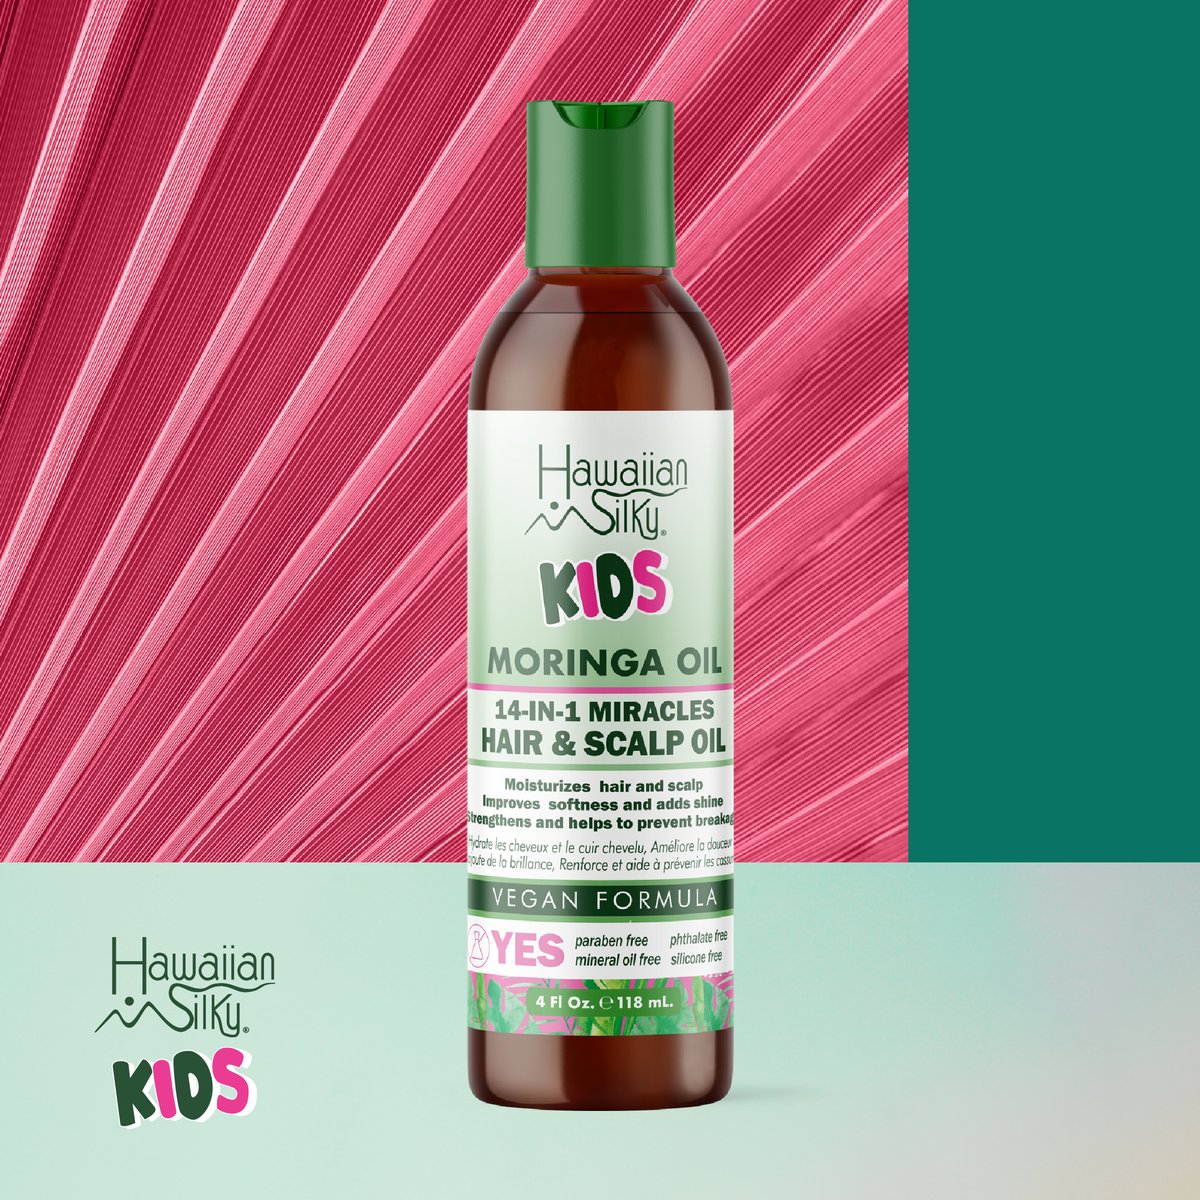 The Hawaiian Silky Kids line also includes a 14-in-1 Hair and Scalp Oil to keep your child’s hair moisturized and improve softness and manageability. 
#hawaiiansilky #naturalhair #type2hair #type3hair #type4hair #naturalhairdaily #naturalista #curlyhair   #UKCurlies